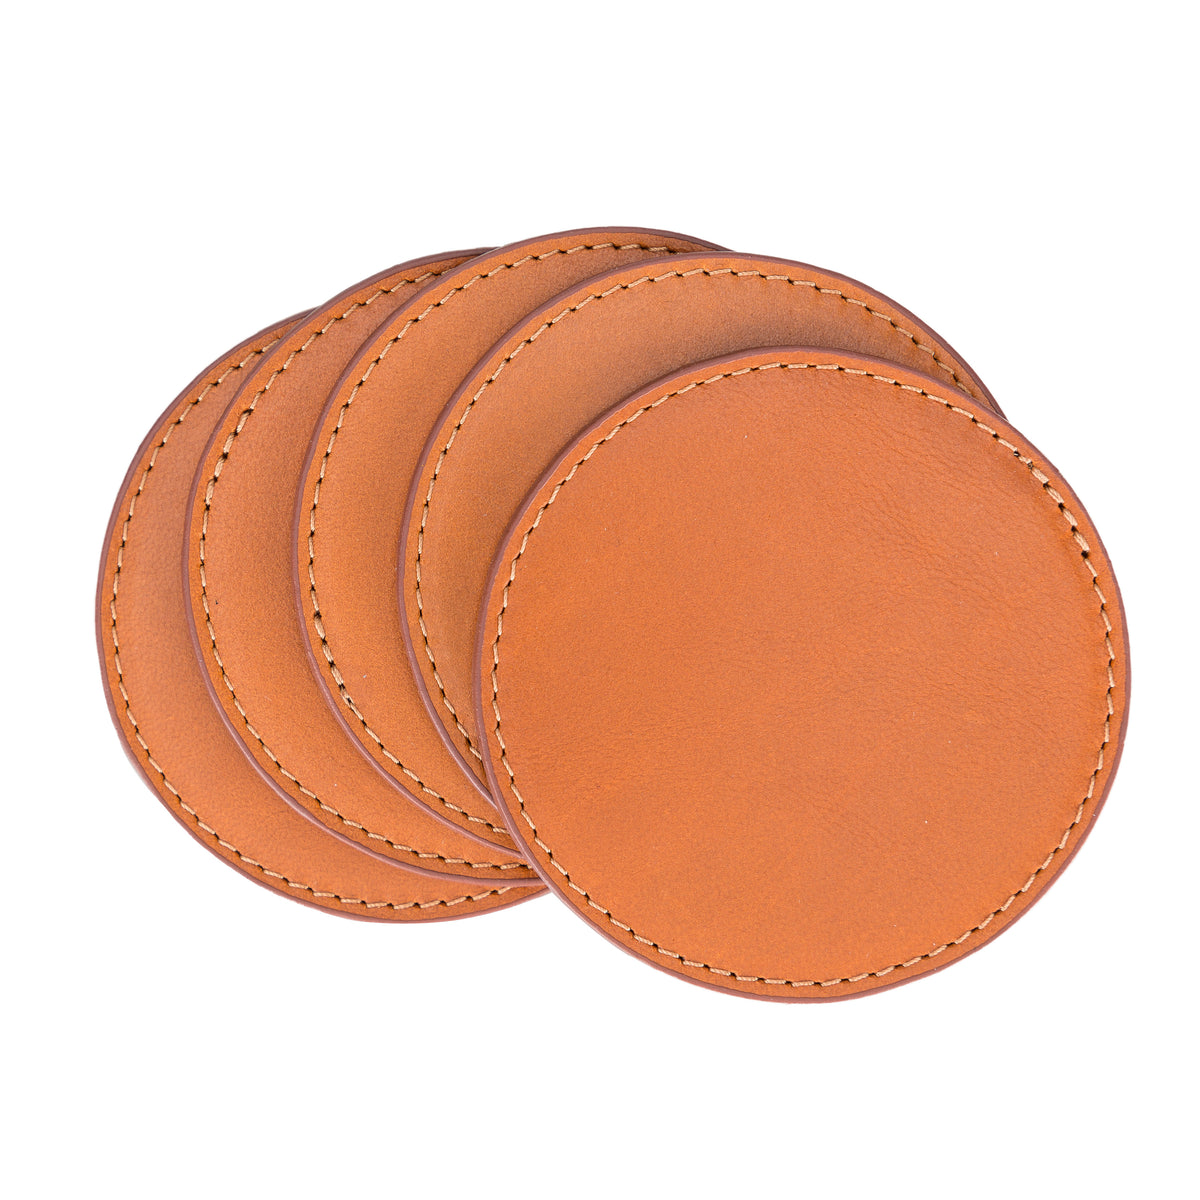 Leather Coasters Brown - Set of 6 pieces